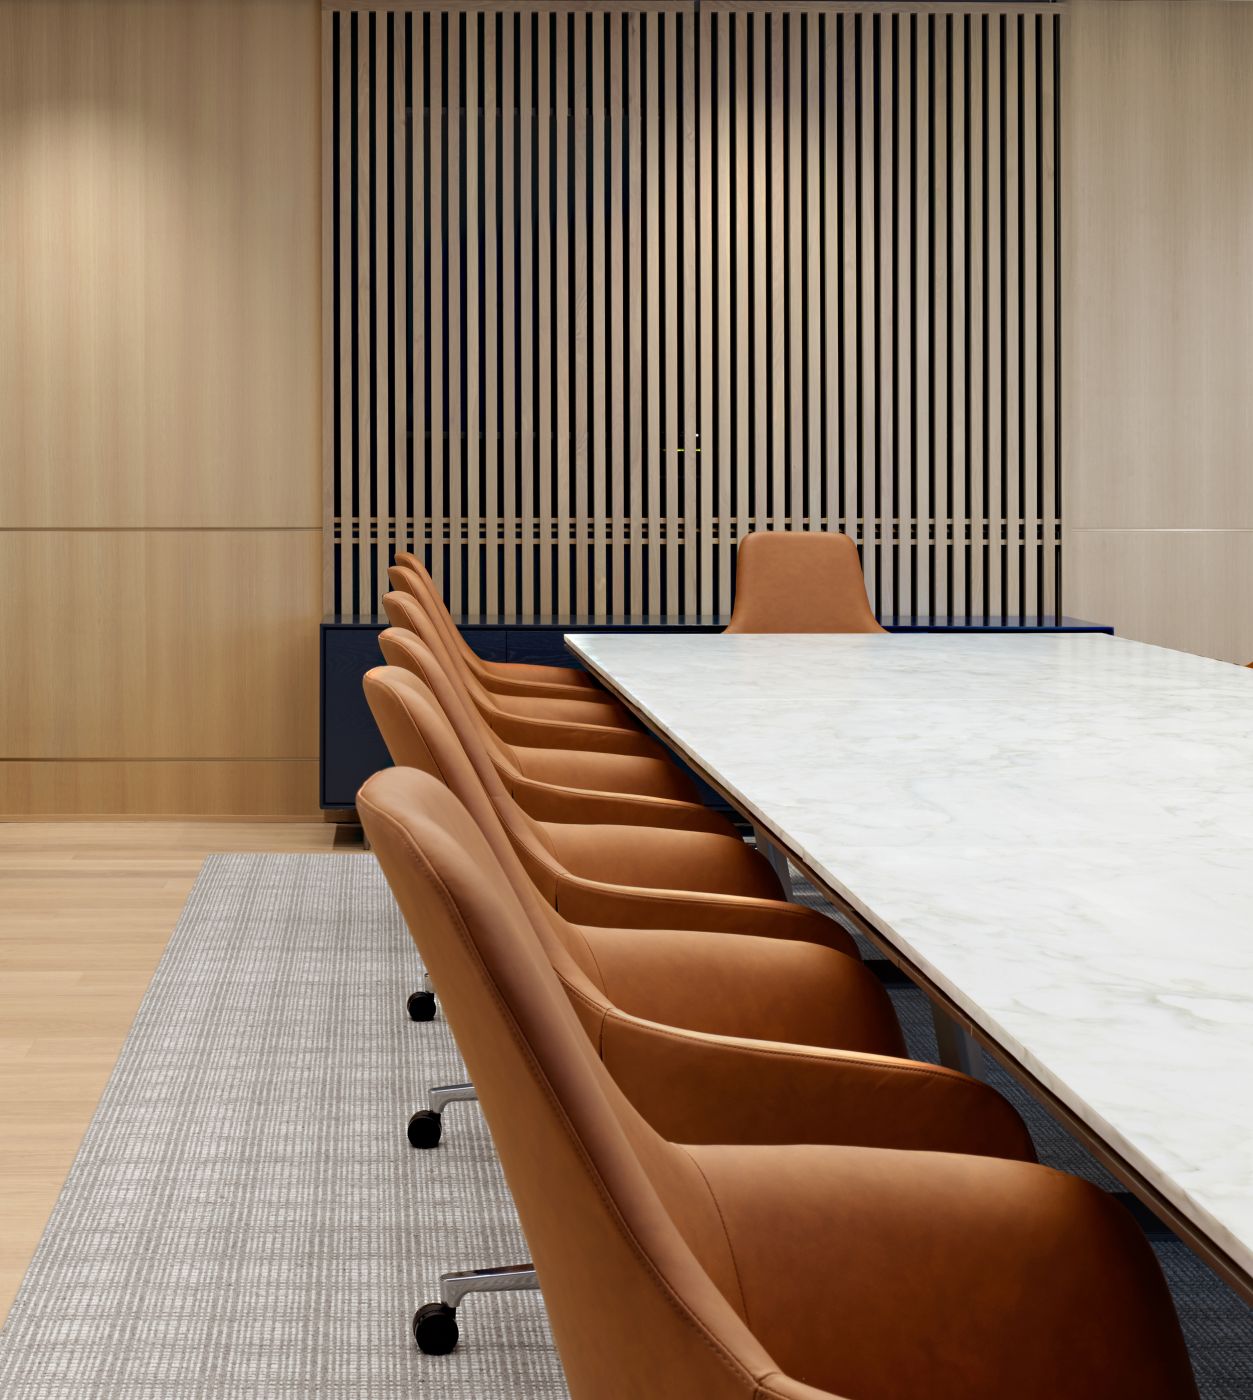 MESA conference table and custom HALO sideboard mesh perfectly with the client's clean and modern design scheme.